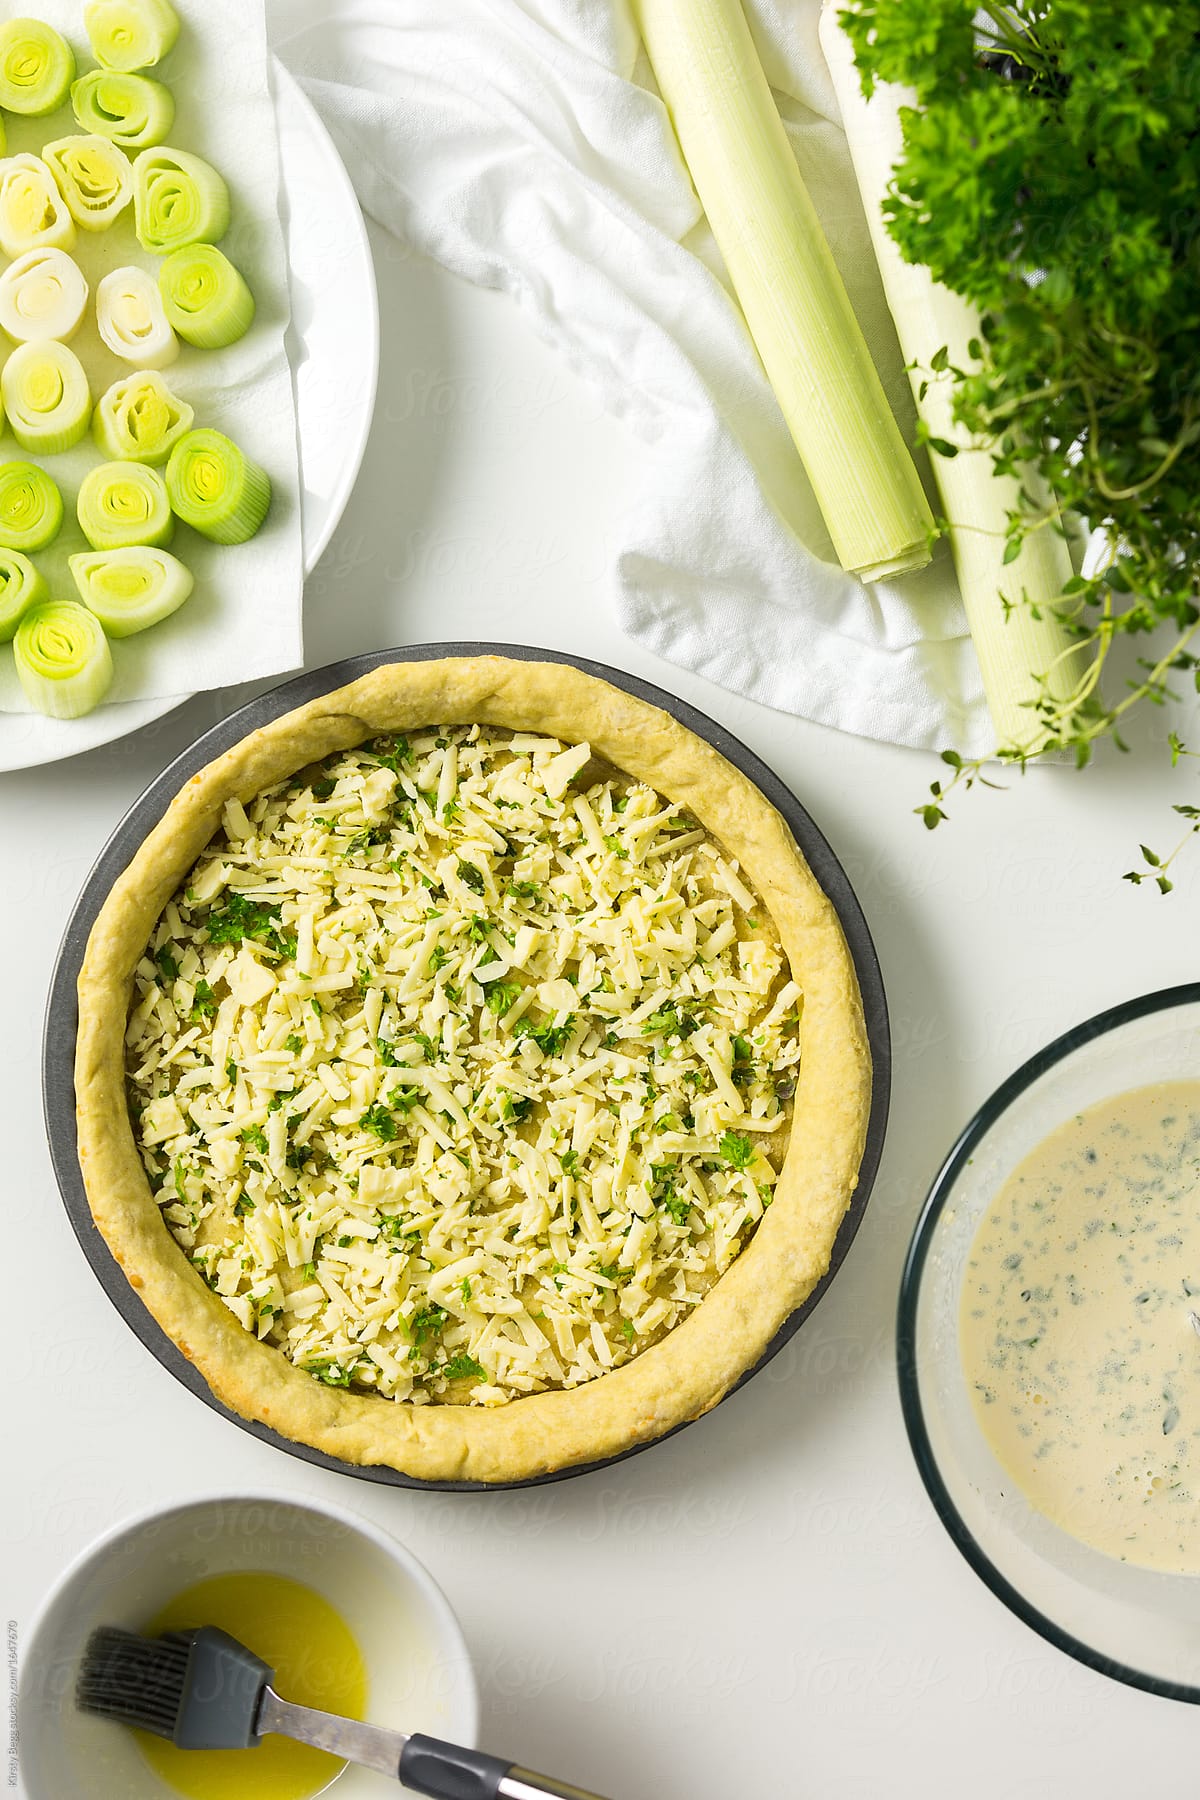 Cheese and herbs in a pastry tart case with leeks